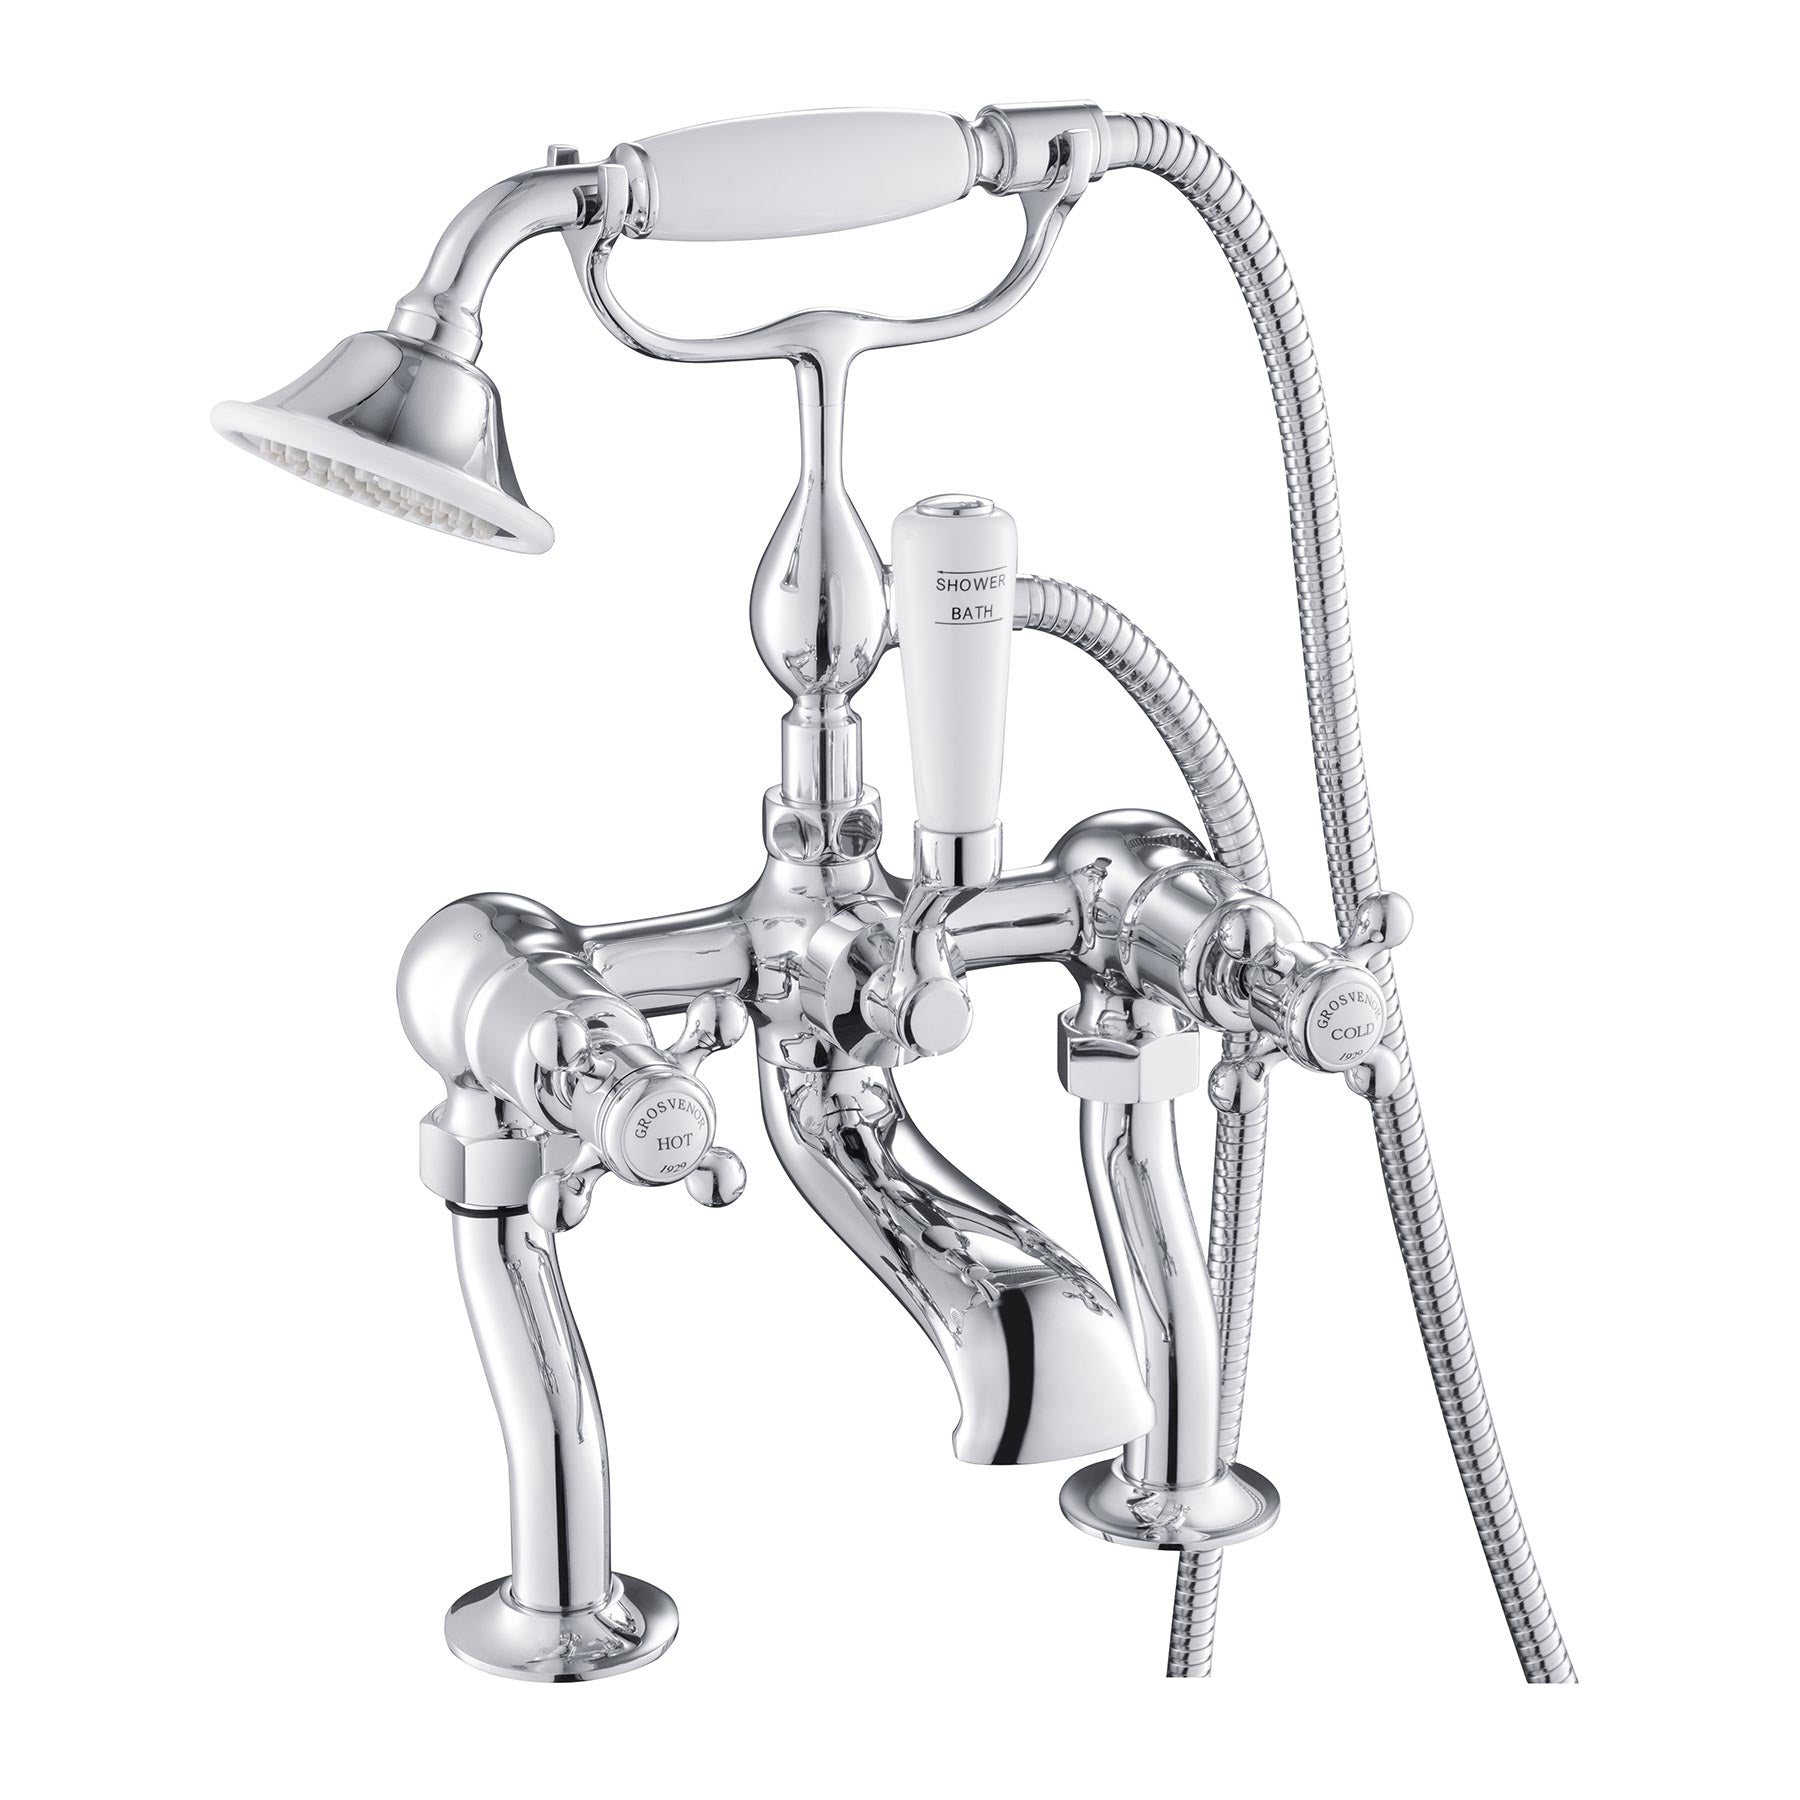 The Chester deck mounted bath mixer with shower handset provides a shower handset and connecting hose, while the flared spout is an angled drop